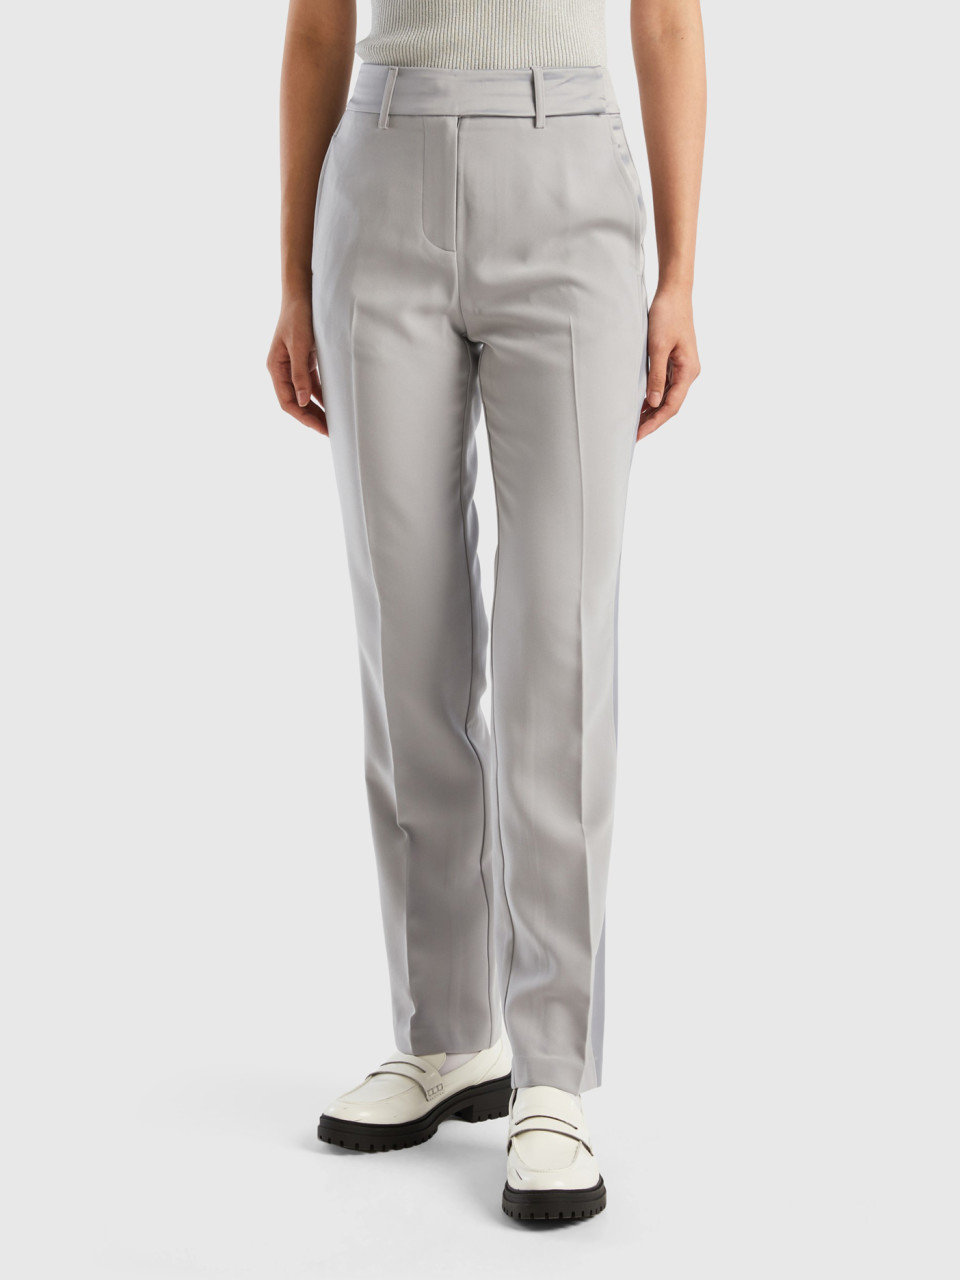 Benetton, Trousers With Satin Details, Light Gray, Women